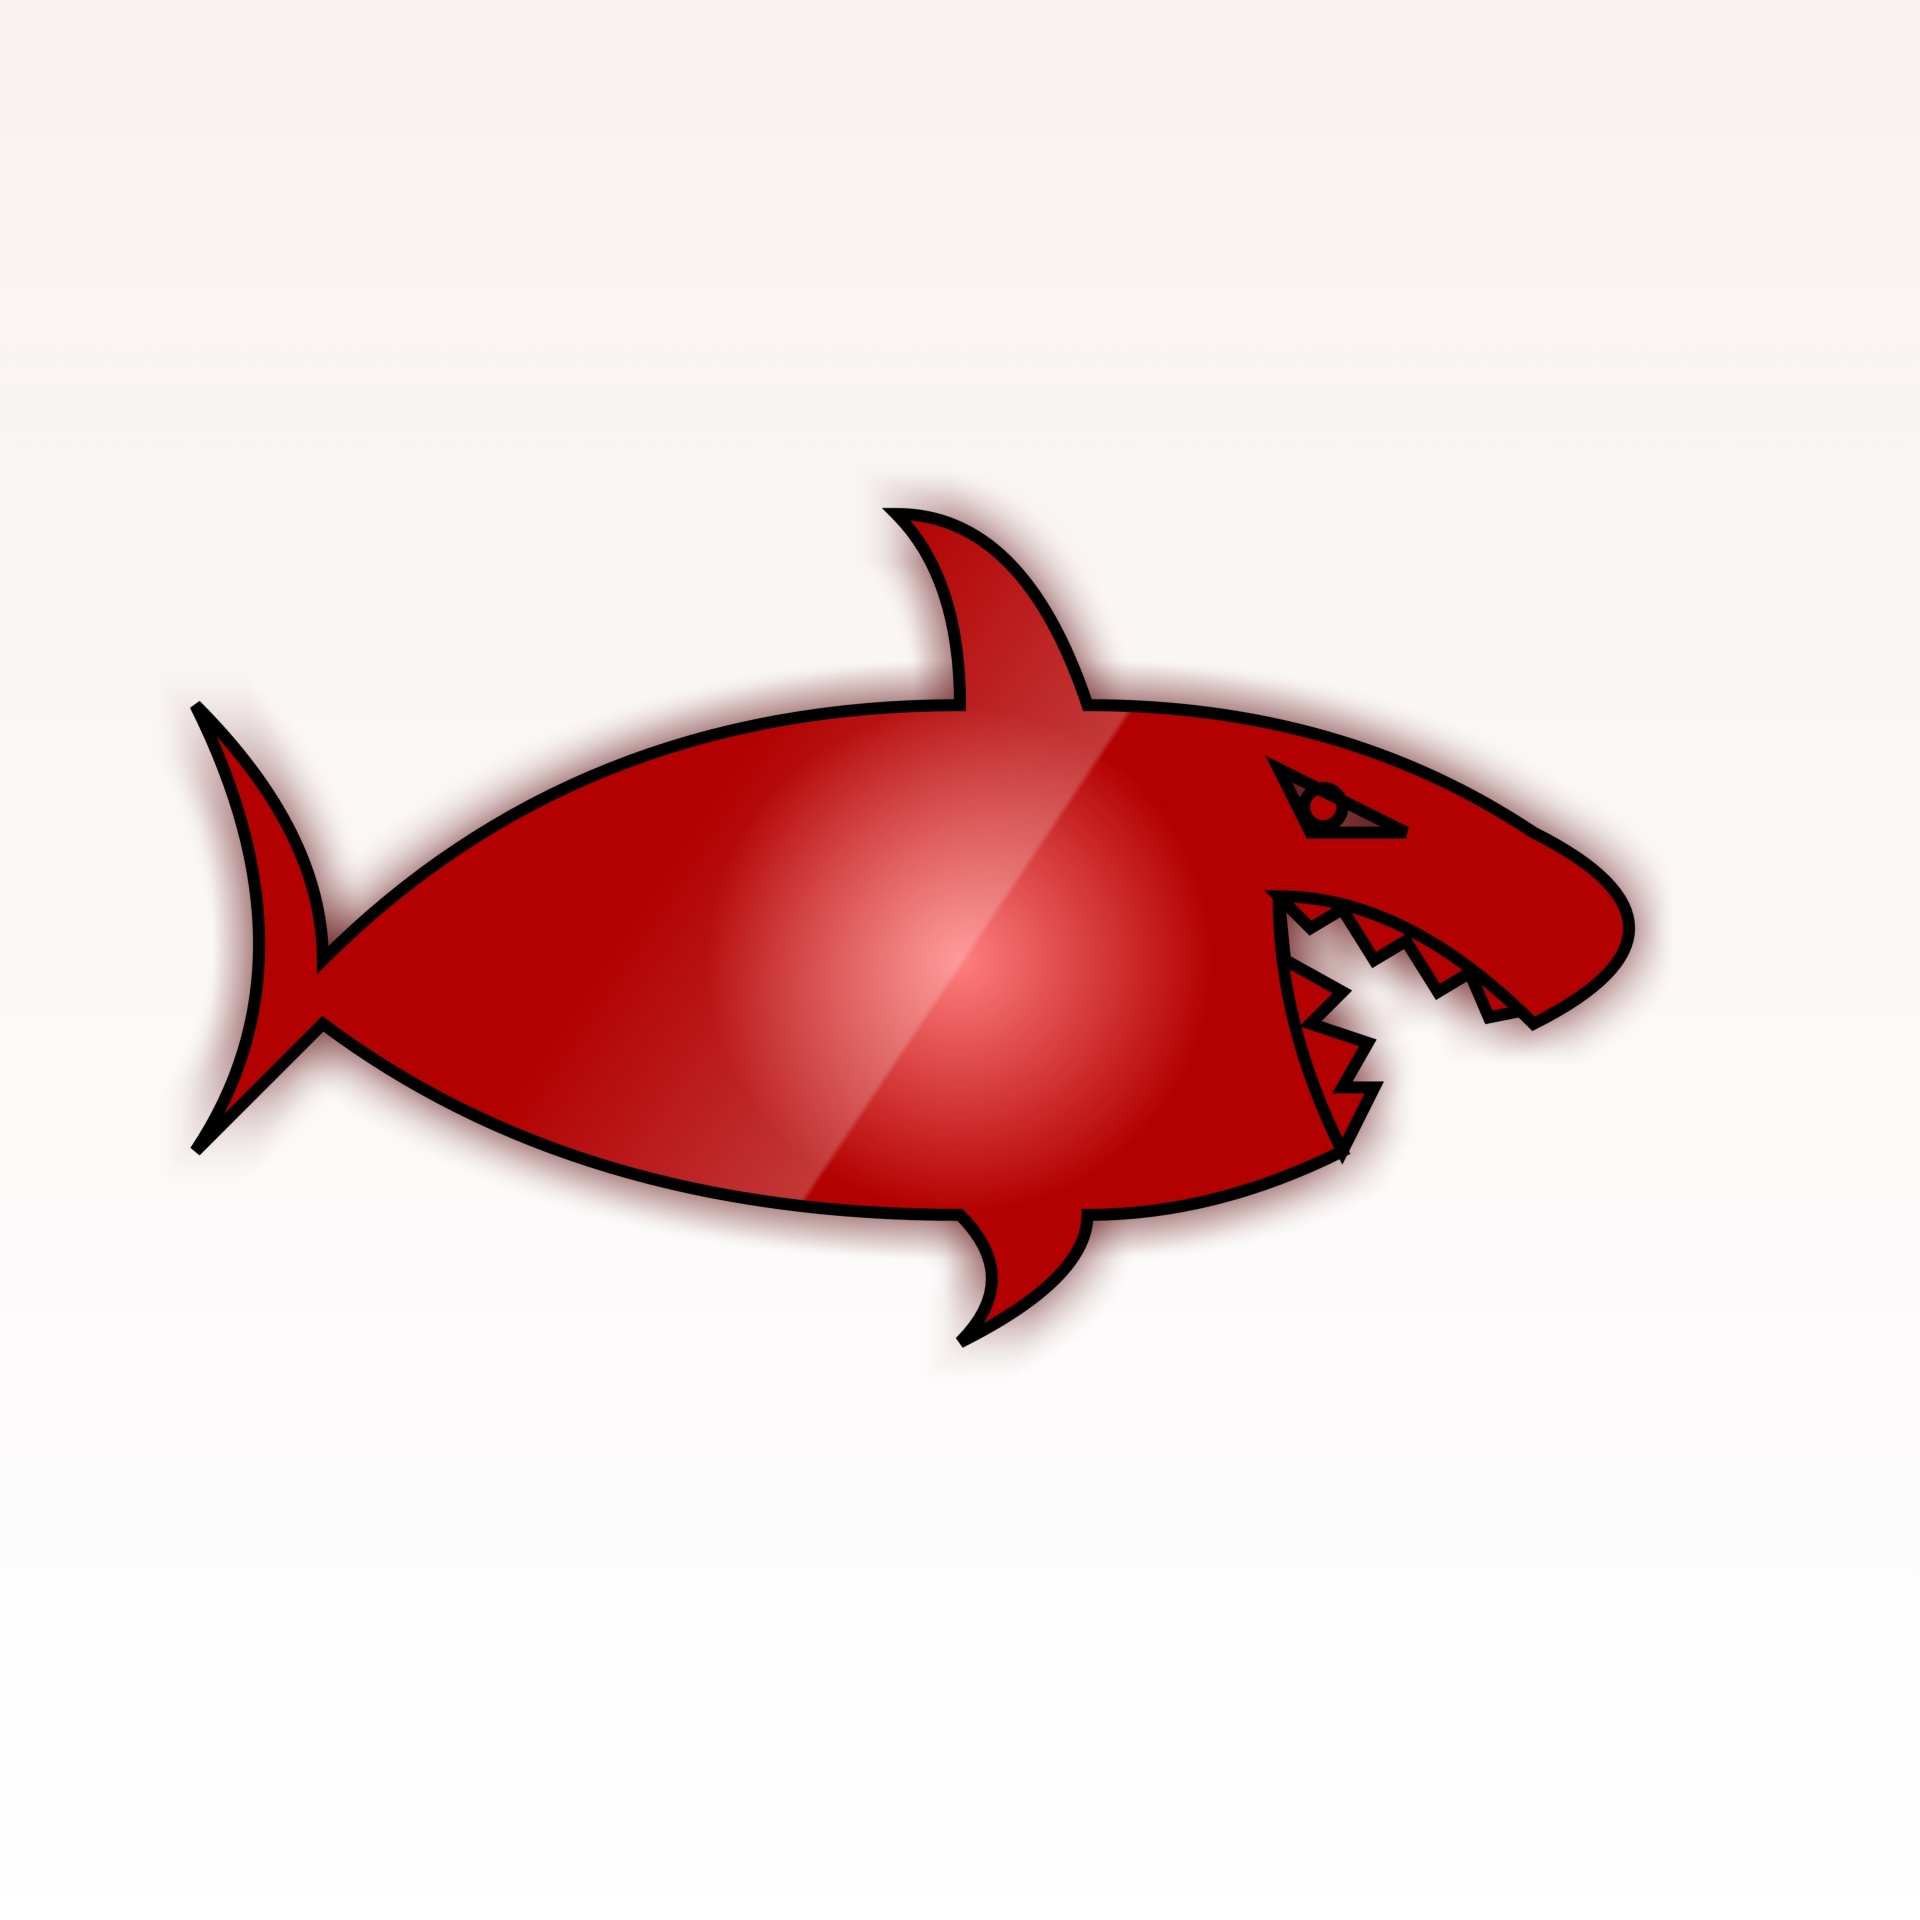 red shark drawing free photo